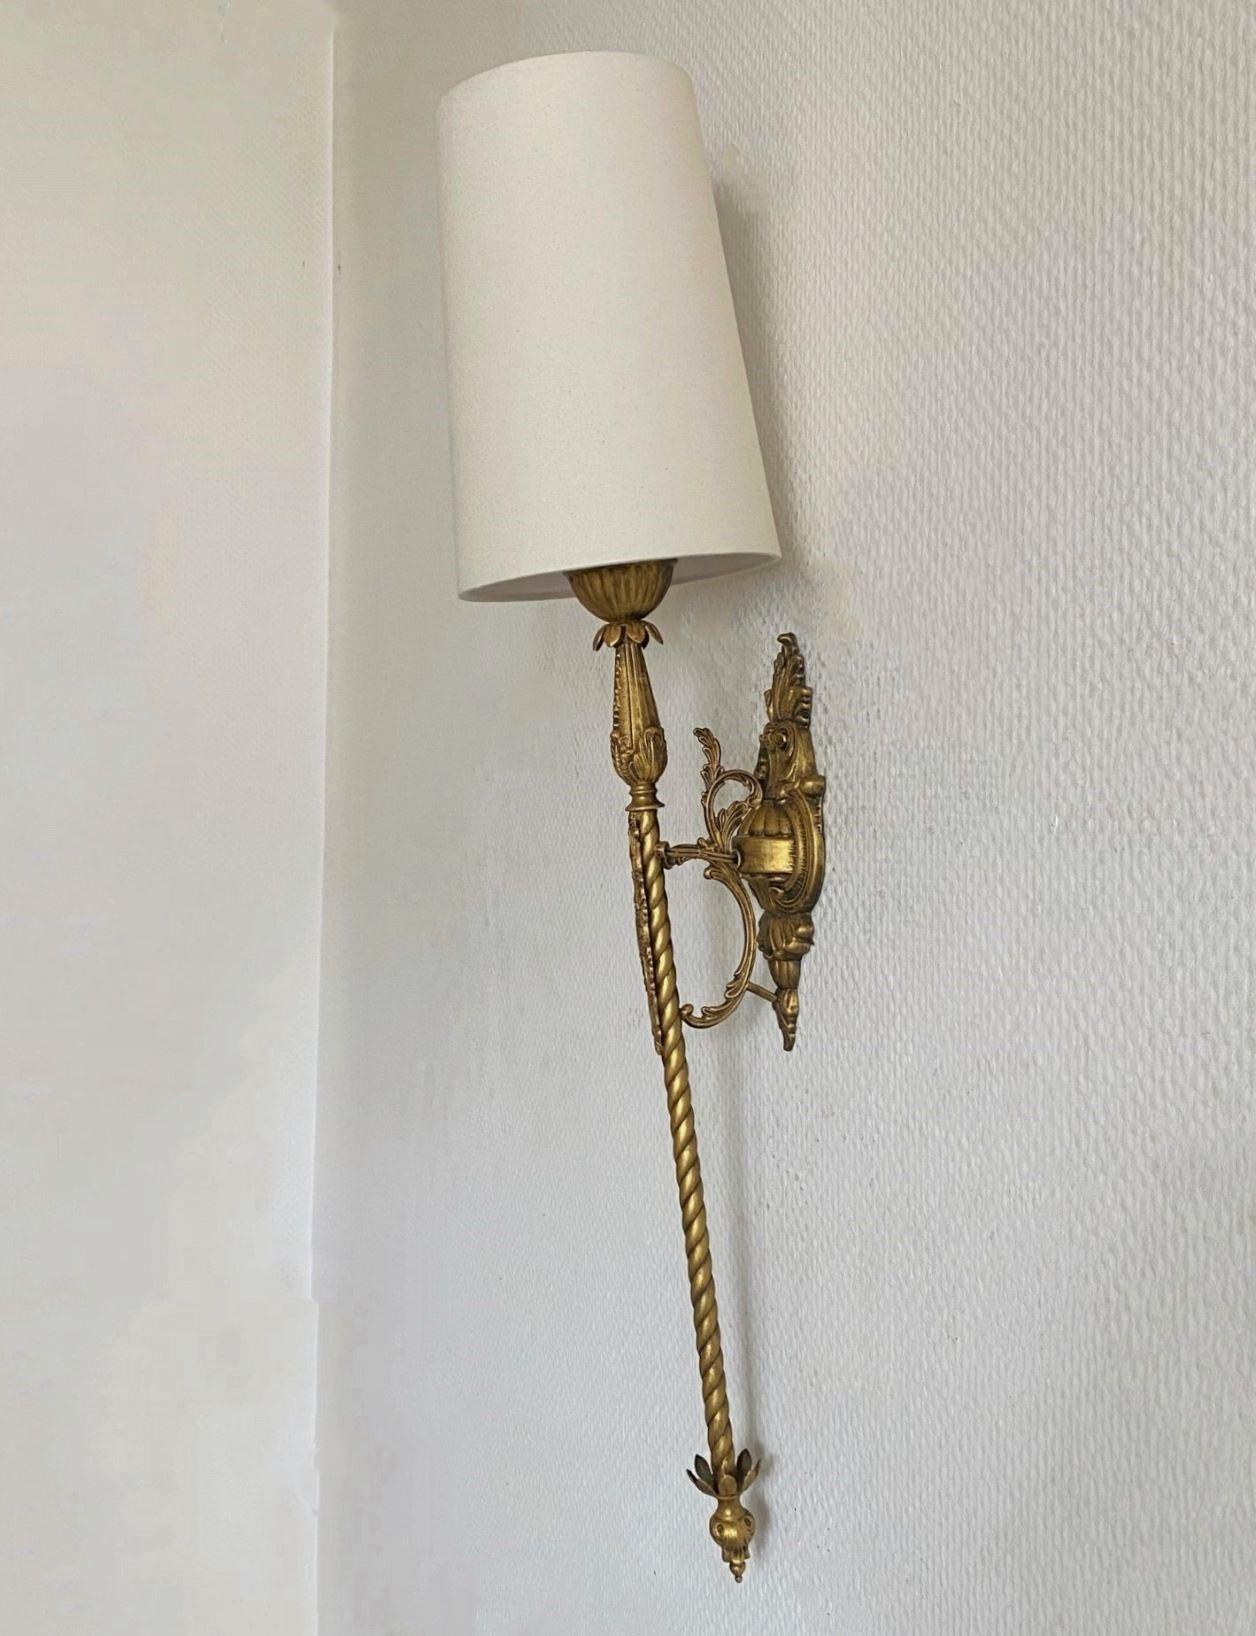 Pair of French Tall Art Deco Bronze Torchiere Wall Sconces, 1930s For Sale 3